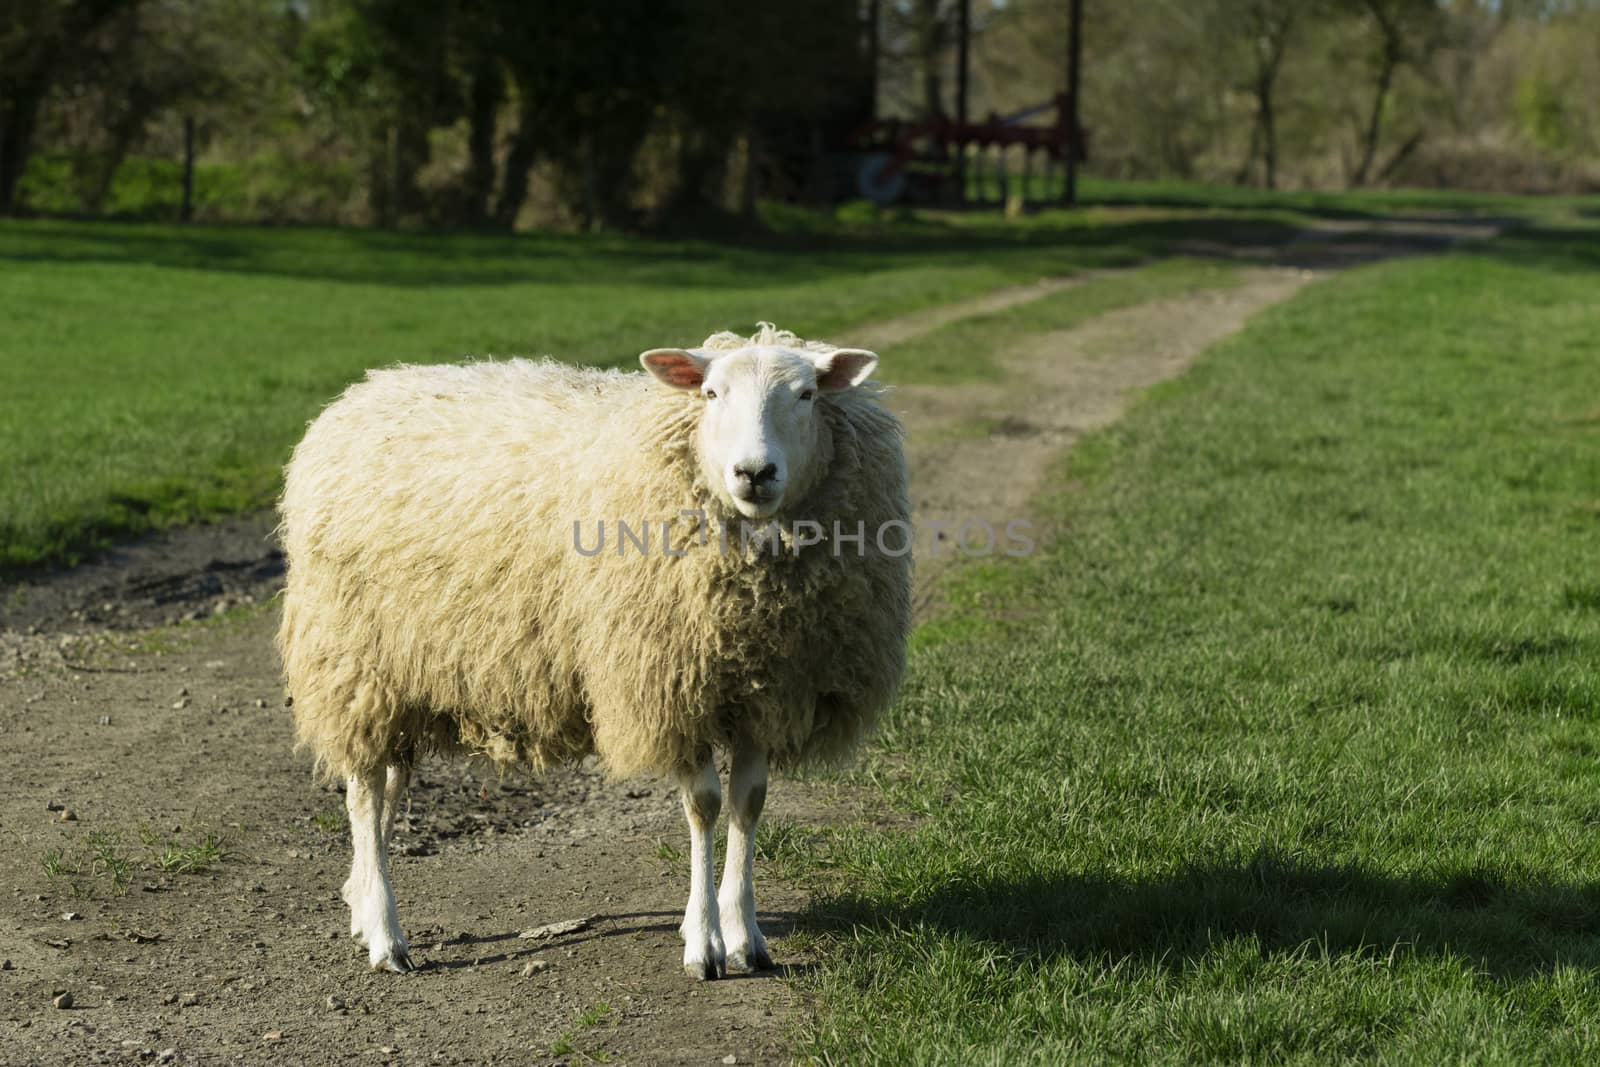 Adult sheep stands in the middle of a farm track in a lush, grassy field